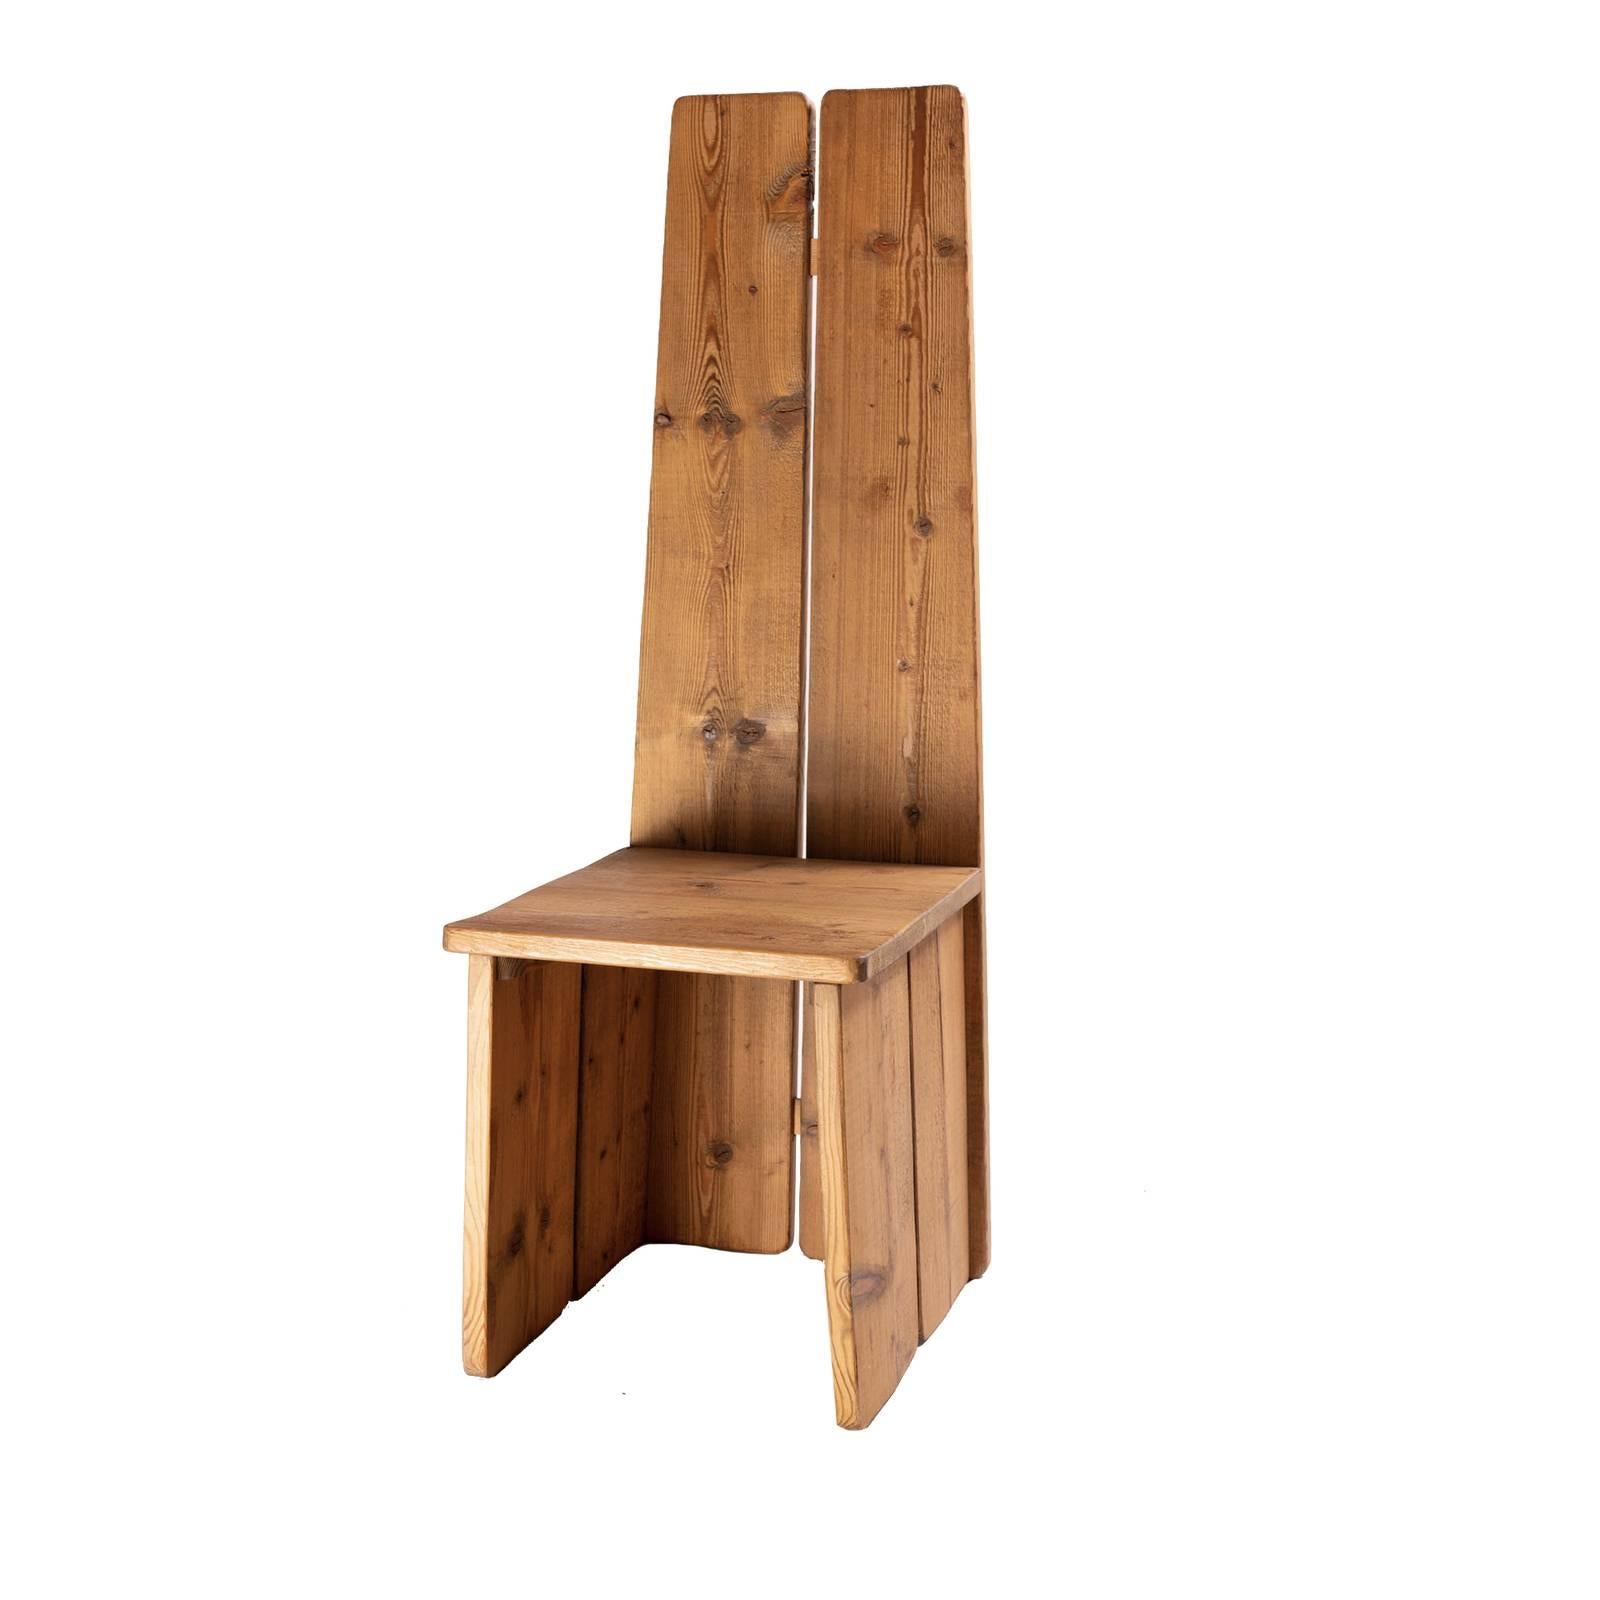 A stunning object of functional decor that will enrich a rustic or contemporary interior, this chair was crafted entirely of solid larch with a very comfortable seat, accented with a high backrest. The elegant minimalism of its silhouette makes it a